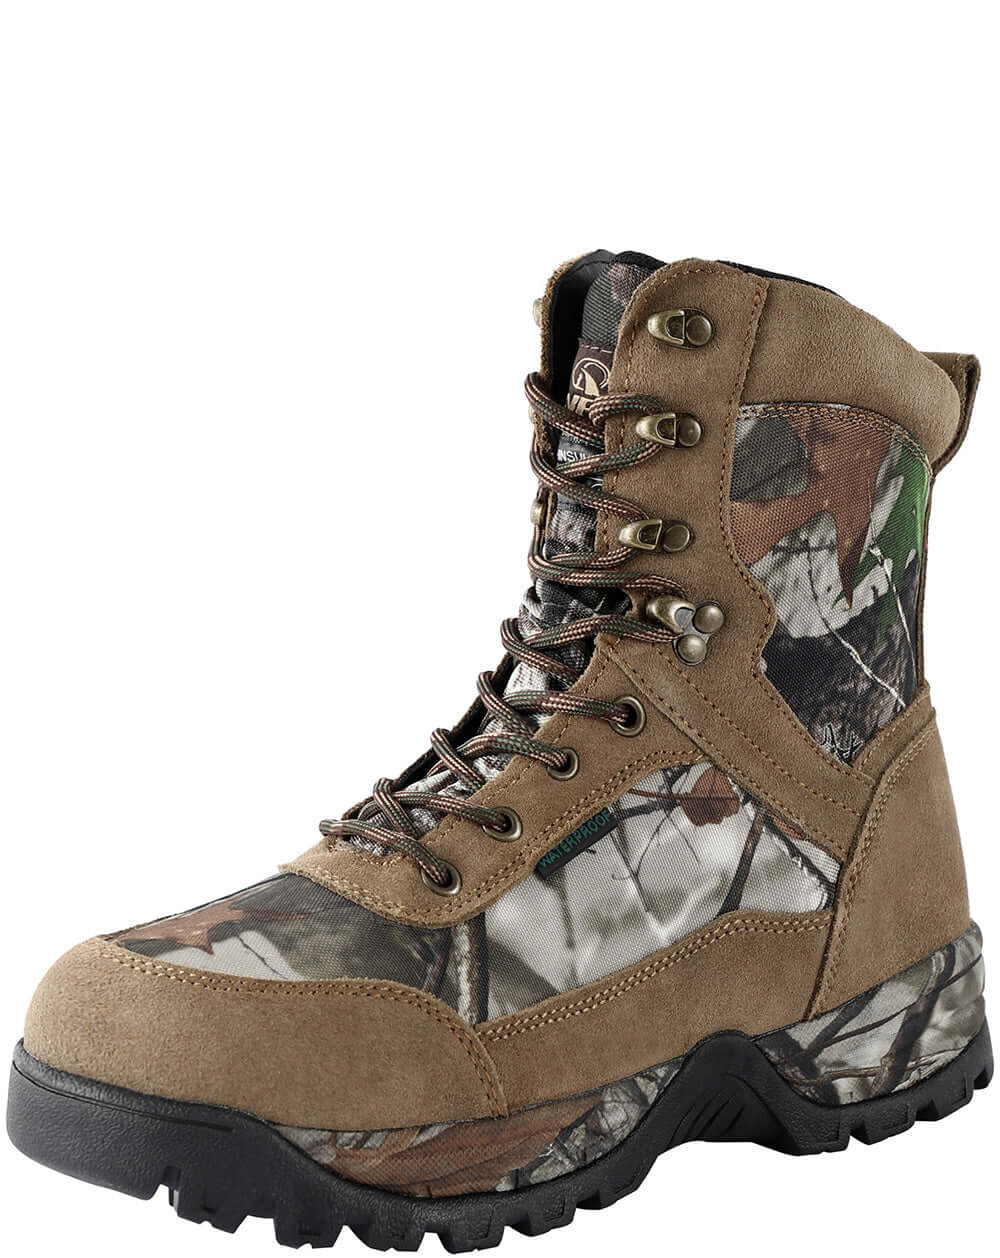  8 Fans Ankle Deck Boots, Realtree WAV3 Camo Waterproof Mud  Muck Rubber Rain Boots Mens Womens Camp Boots for Rain,Fishing, Hunting,  Boating, Kayaking,Camp Wear : Sports & Outdoors